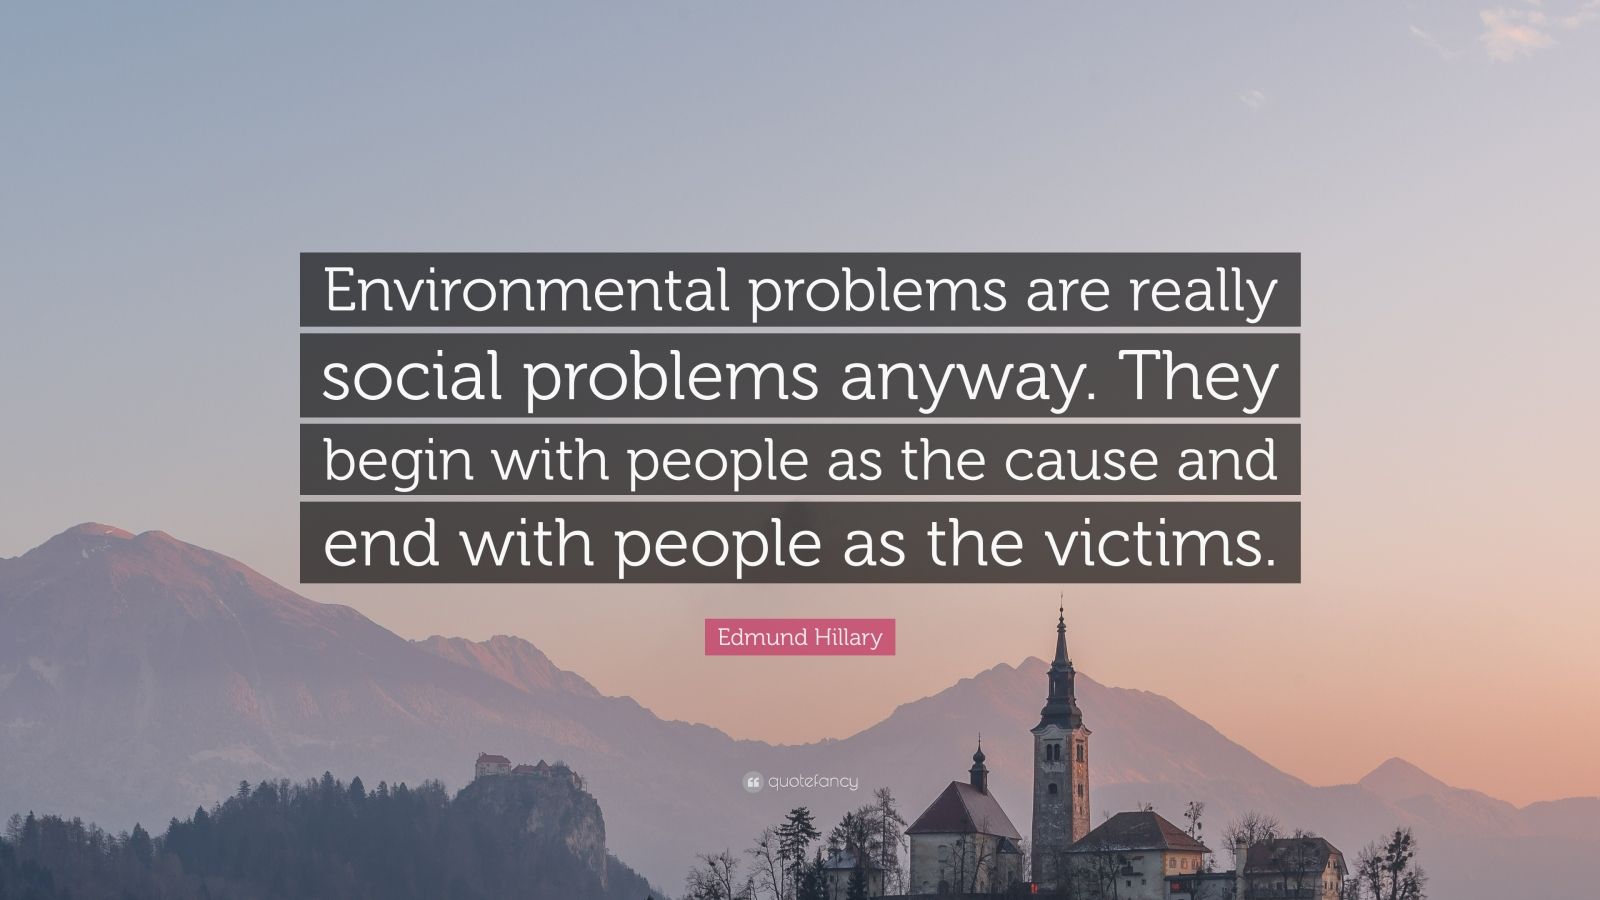 Edmund Hillary Quote: “Environmental problems are really social